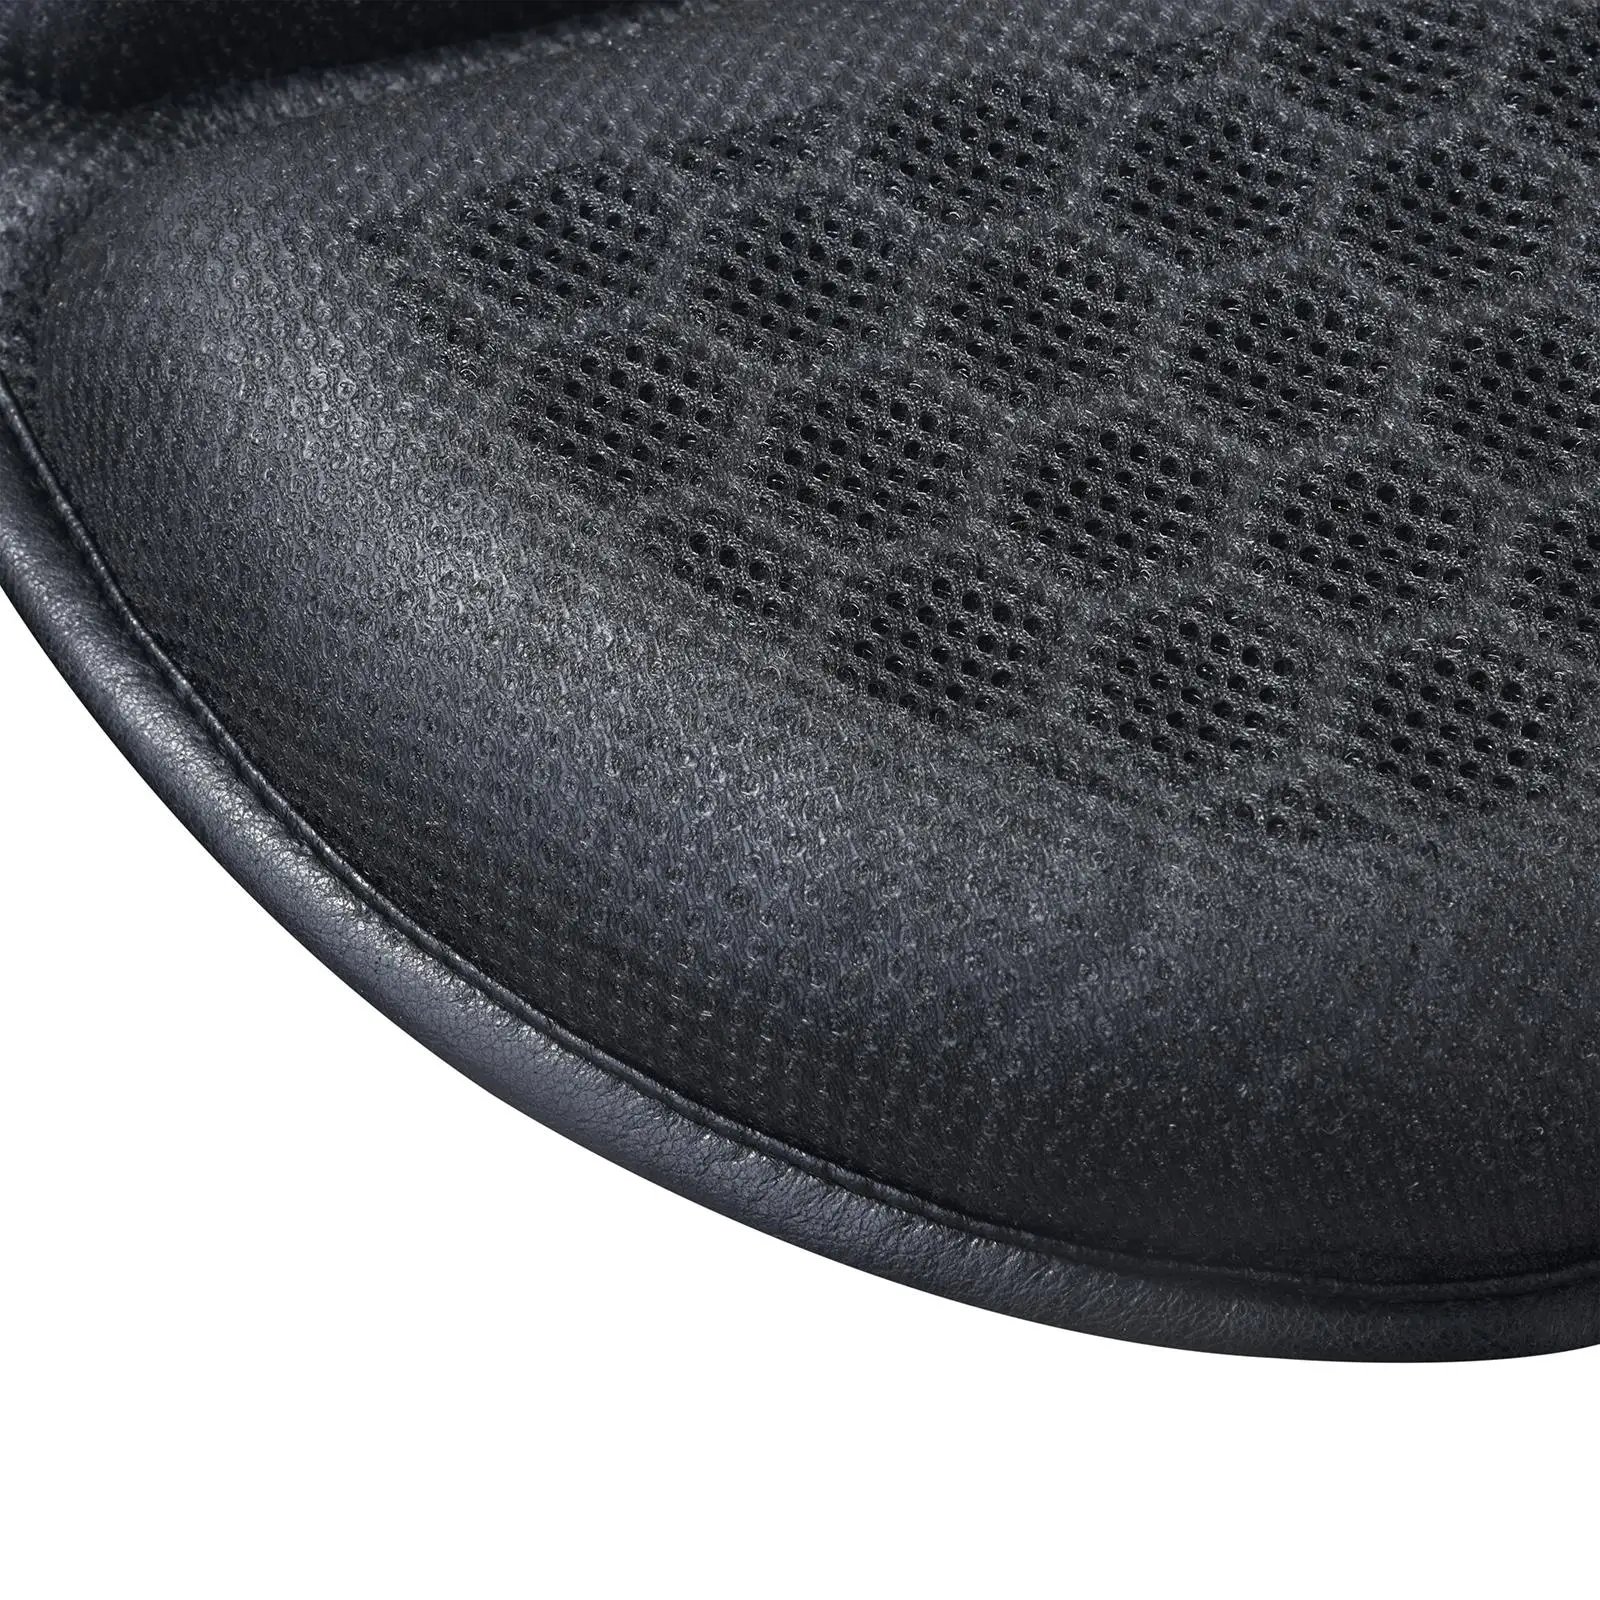 Motorbike Seat Cushion Shock Absorption Decompression Comfortable for Electric